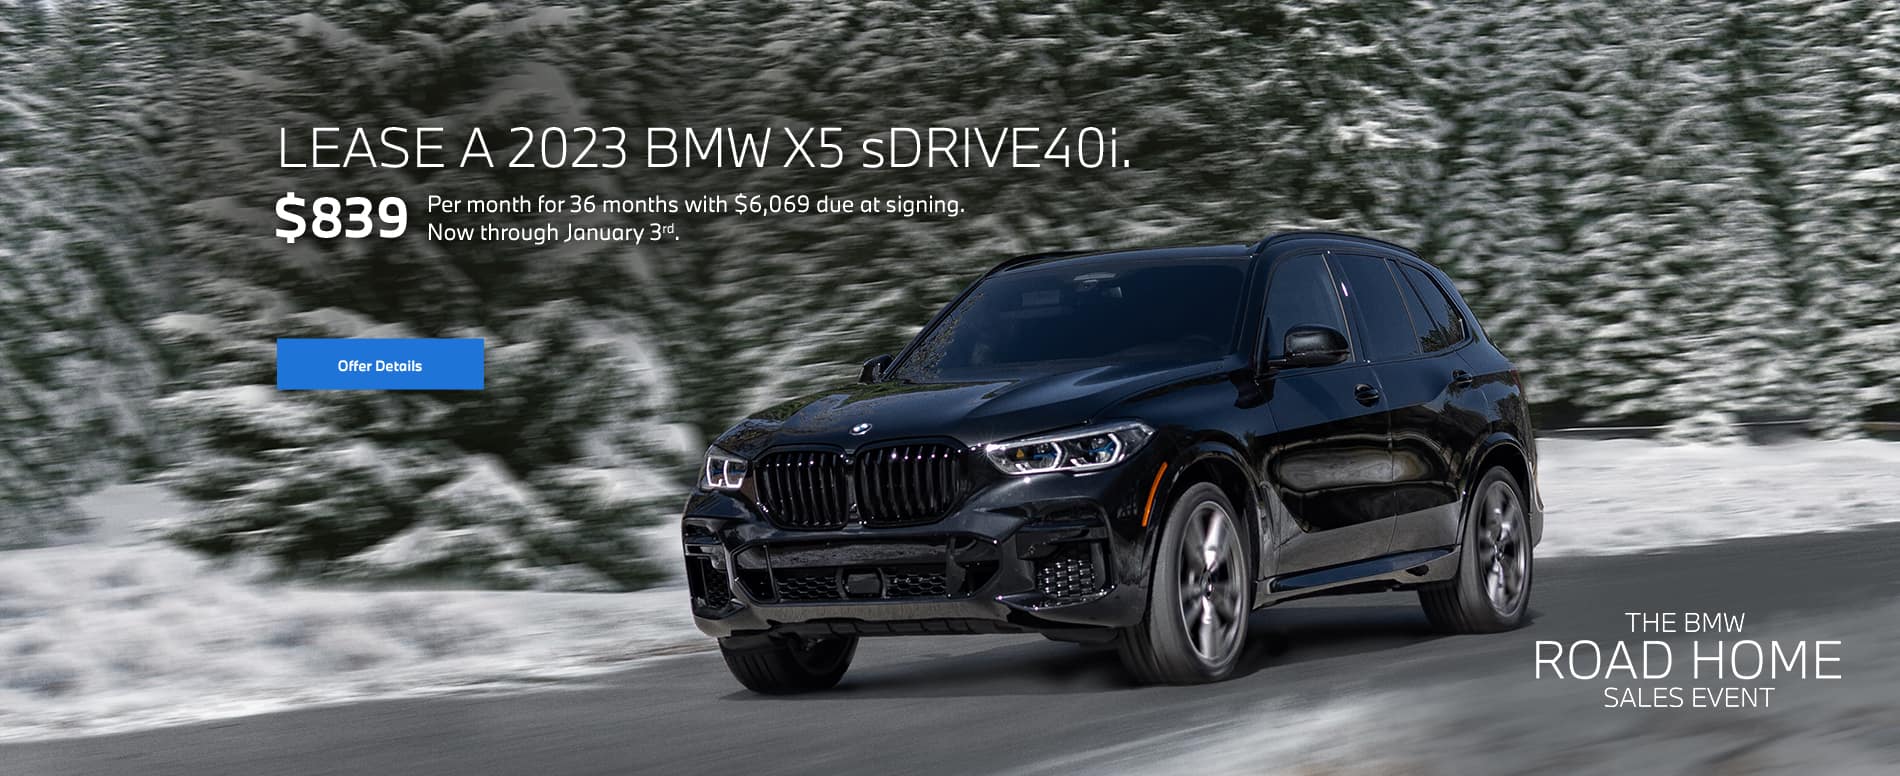 2023 X5 lease starting at $839 per month for 36 months